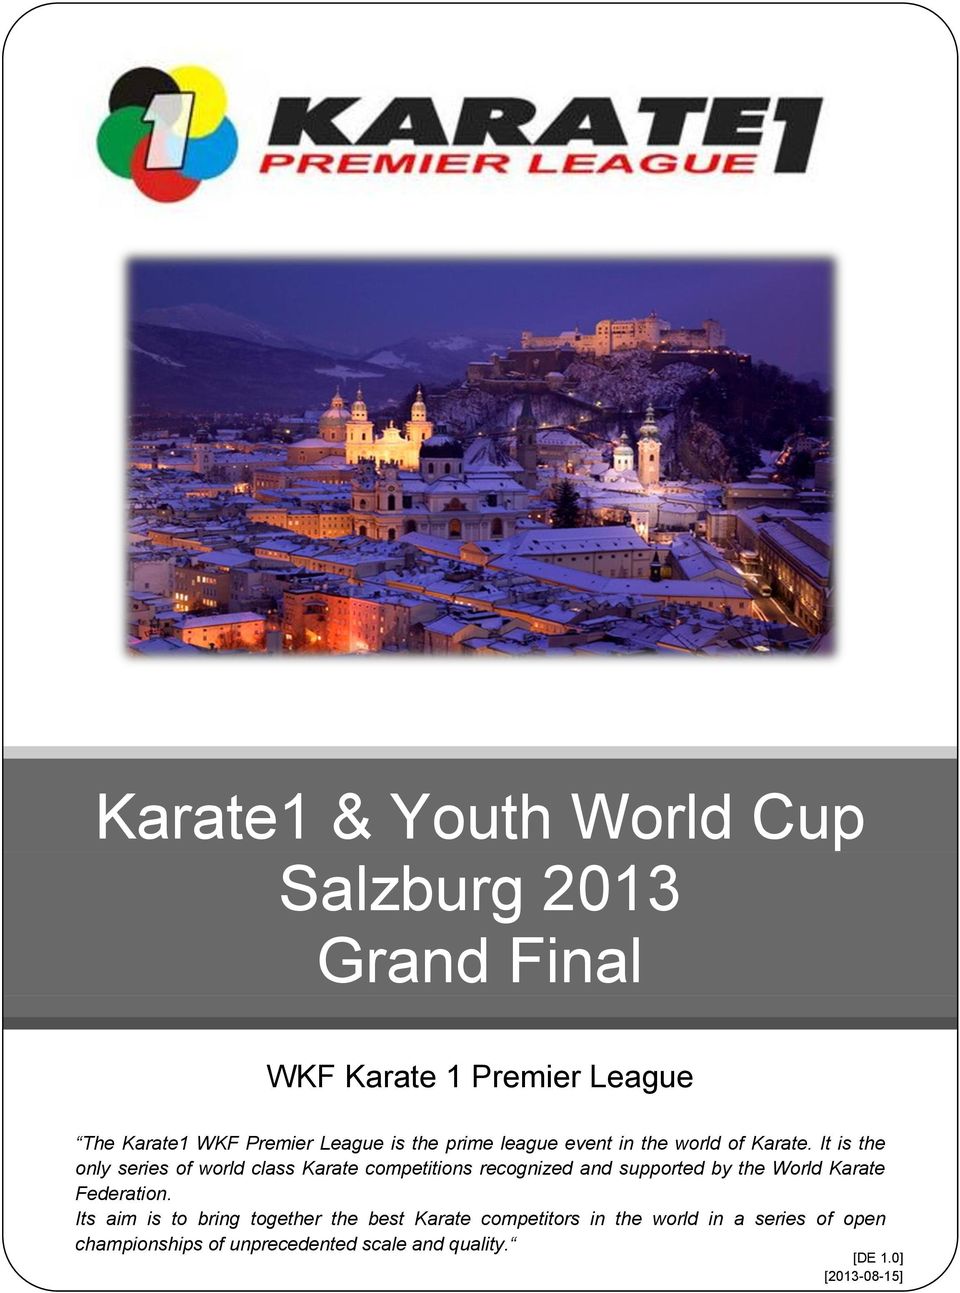 It is the only series of world class Karate competitions recognized and supported by the World Karate